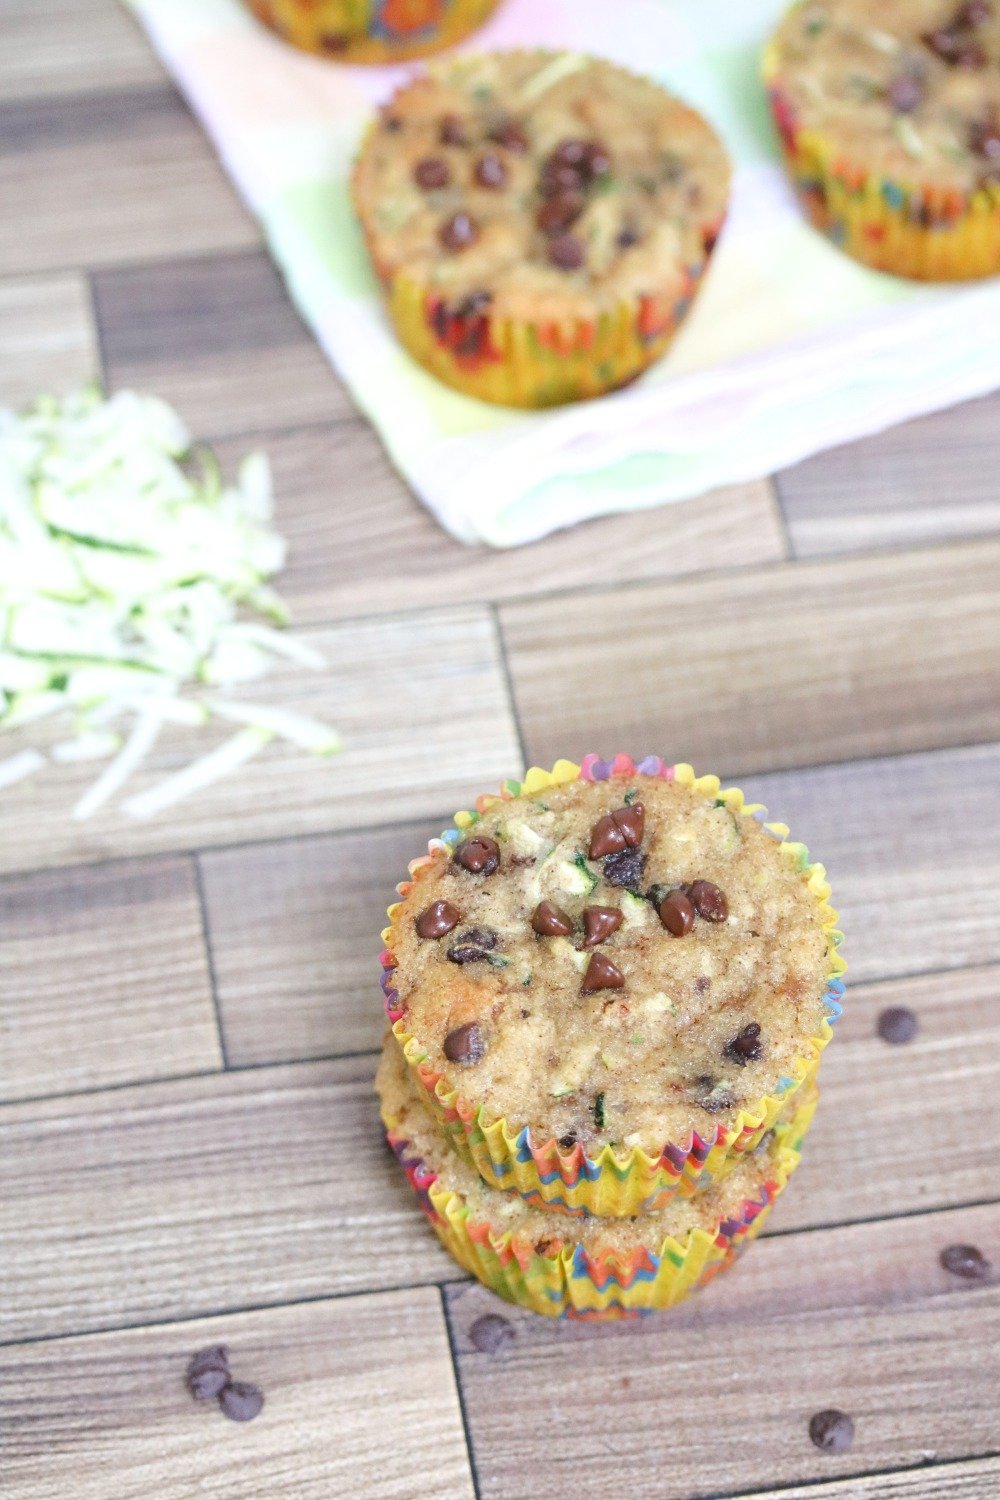 Two chocolate chip muffins stacked with shredded zucchini behind them and more muffins on a linen